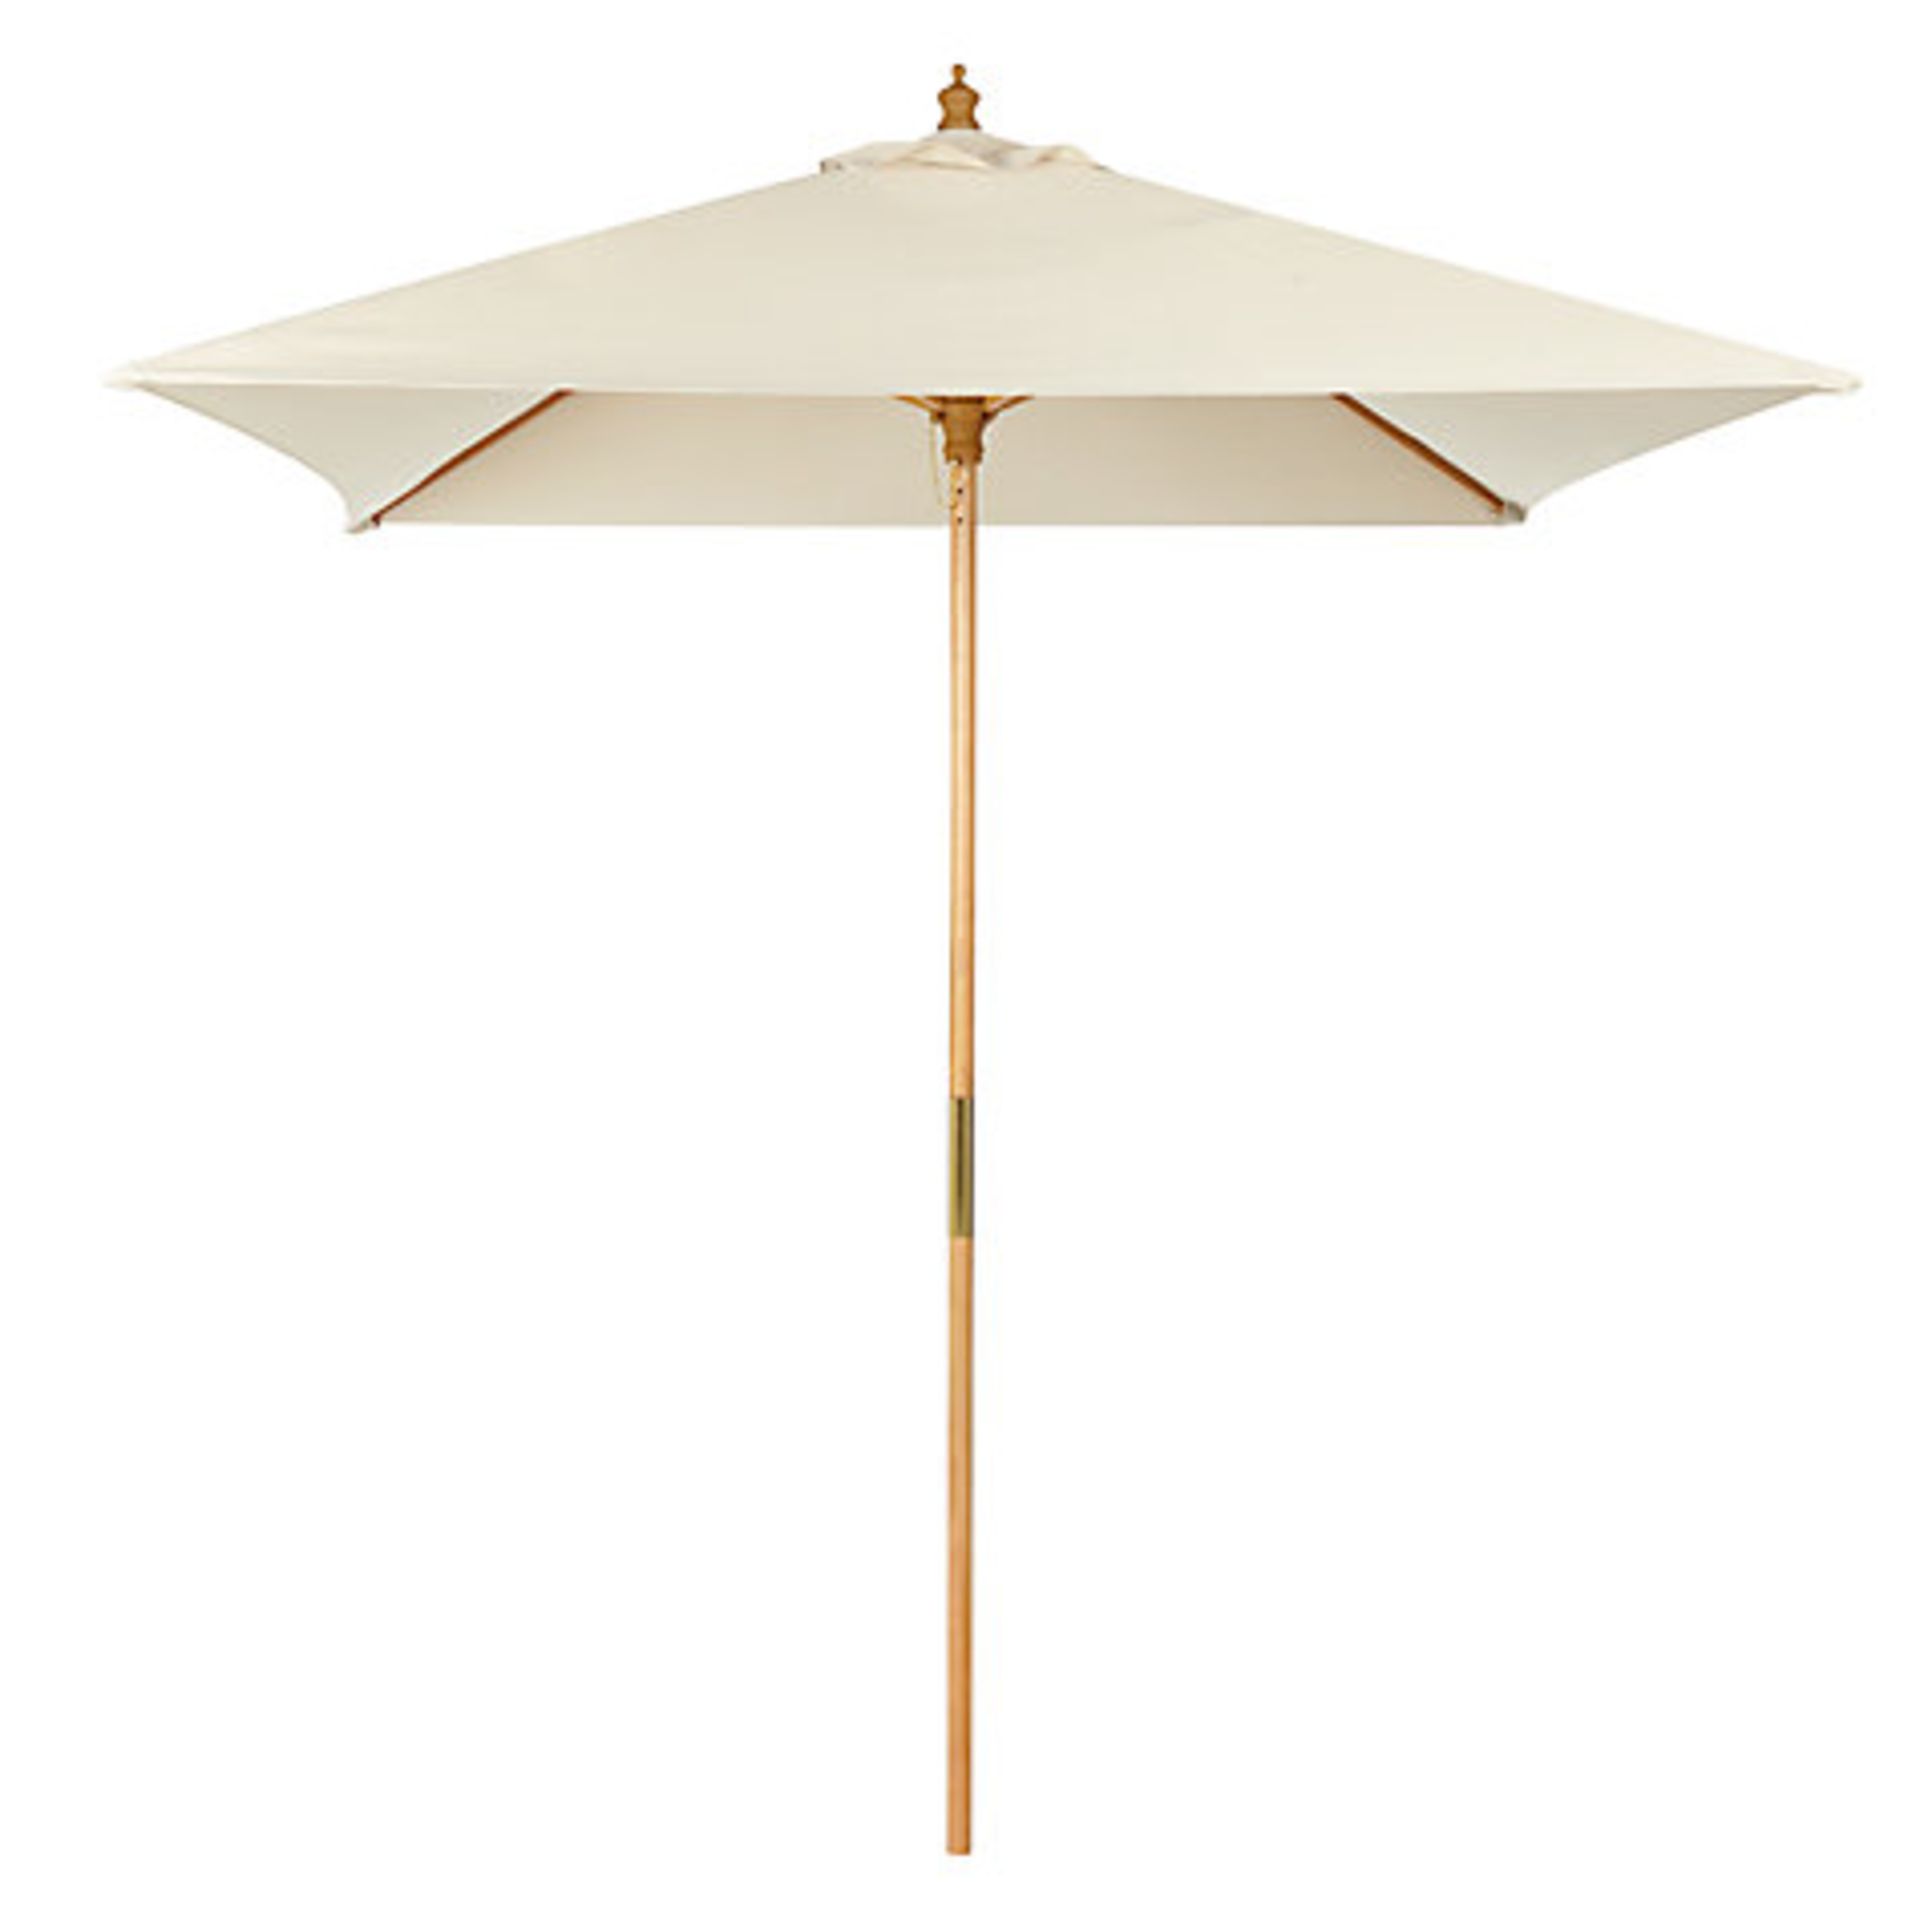 1 x JOHN LEWIS 2M WOODEN PARASOL (02.03.18) (82015601) **THIS ITEM IS FLAT PACKED, IMAGE IS FOR